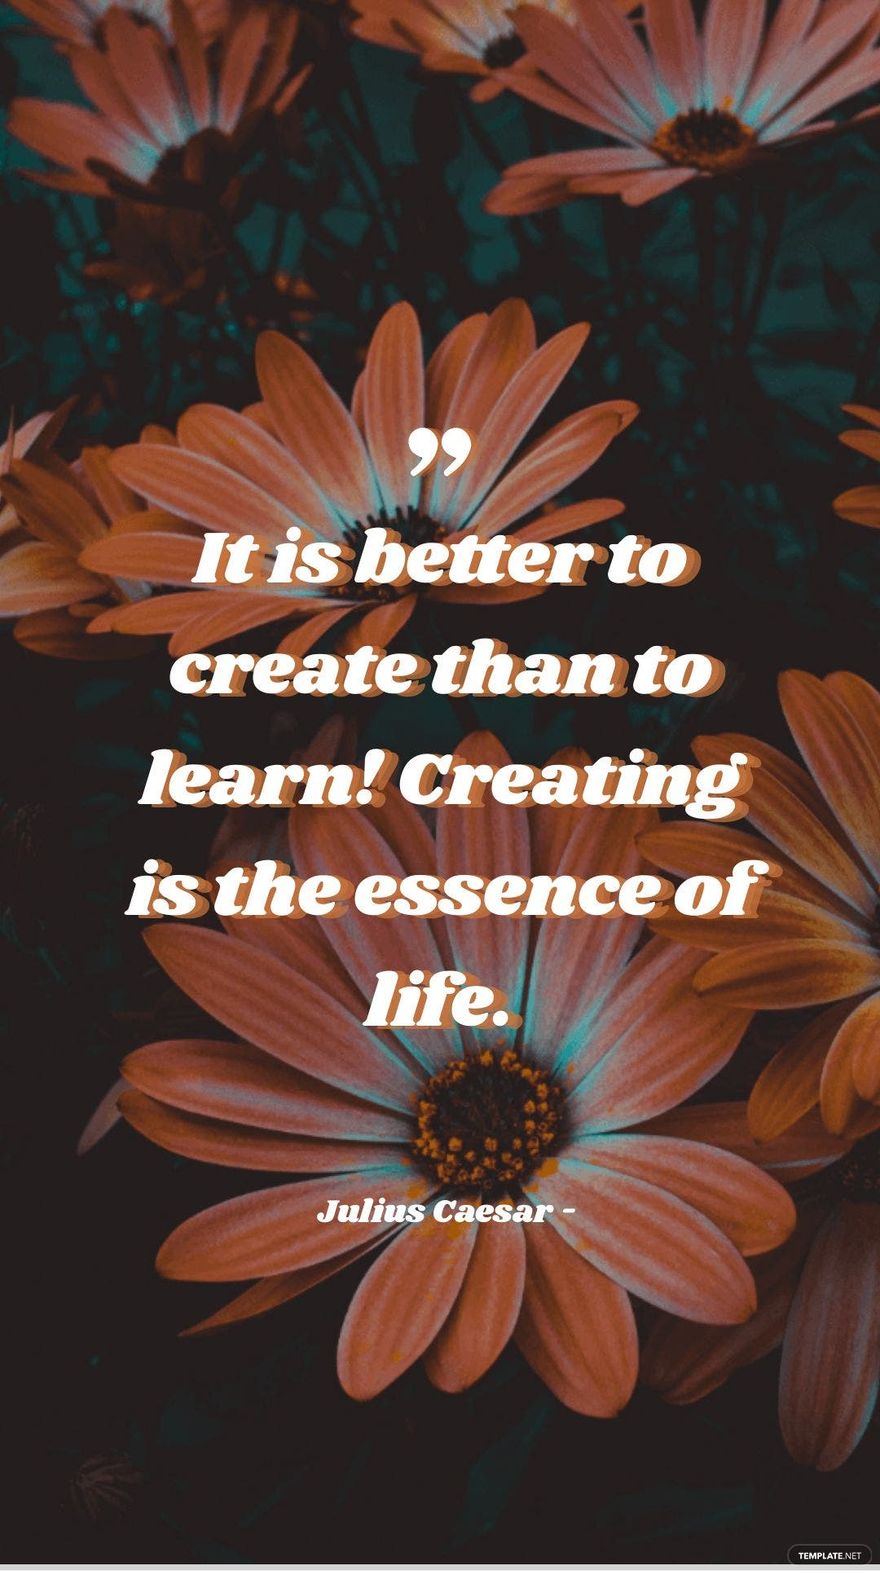 Julius Caesar - It is better to create than to learn! Creating is the essence of life.